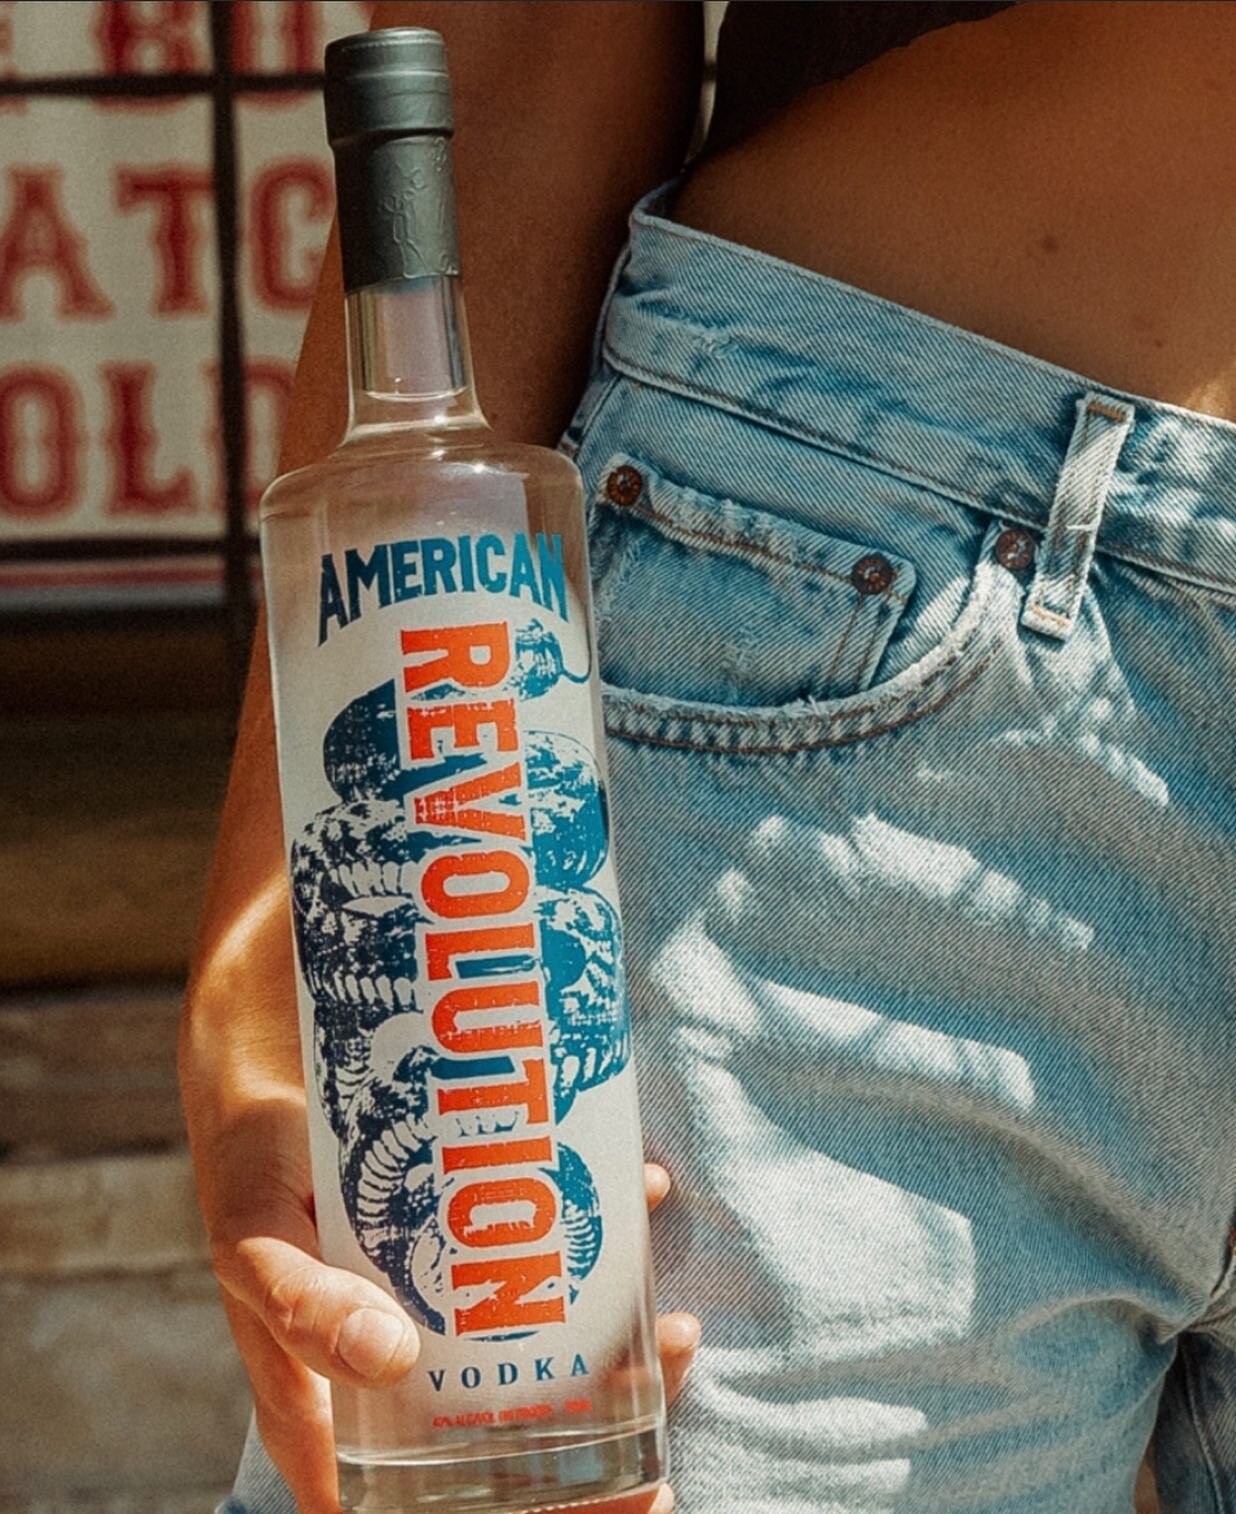 Mondays aren&rsquo;t so bad when you drink quality, clean vodka on the weekends 🇺🇸🇺🇸🇺🇸. Veteran built. Freedom strong 💪 

.
.
.
.
#drink #drinks #food #cocktails #bar #cocktail #bartender #vodka #love #premium #mixology #party #alcohol #drinks